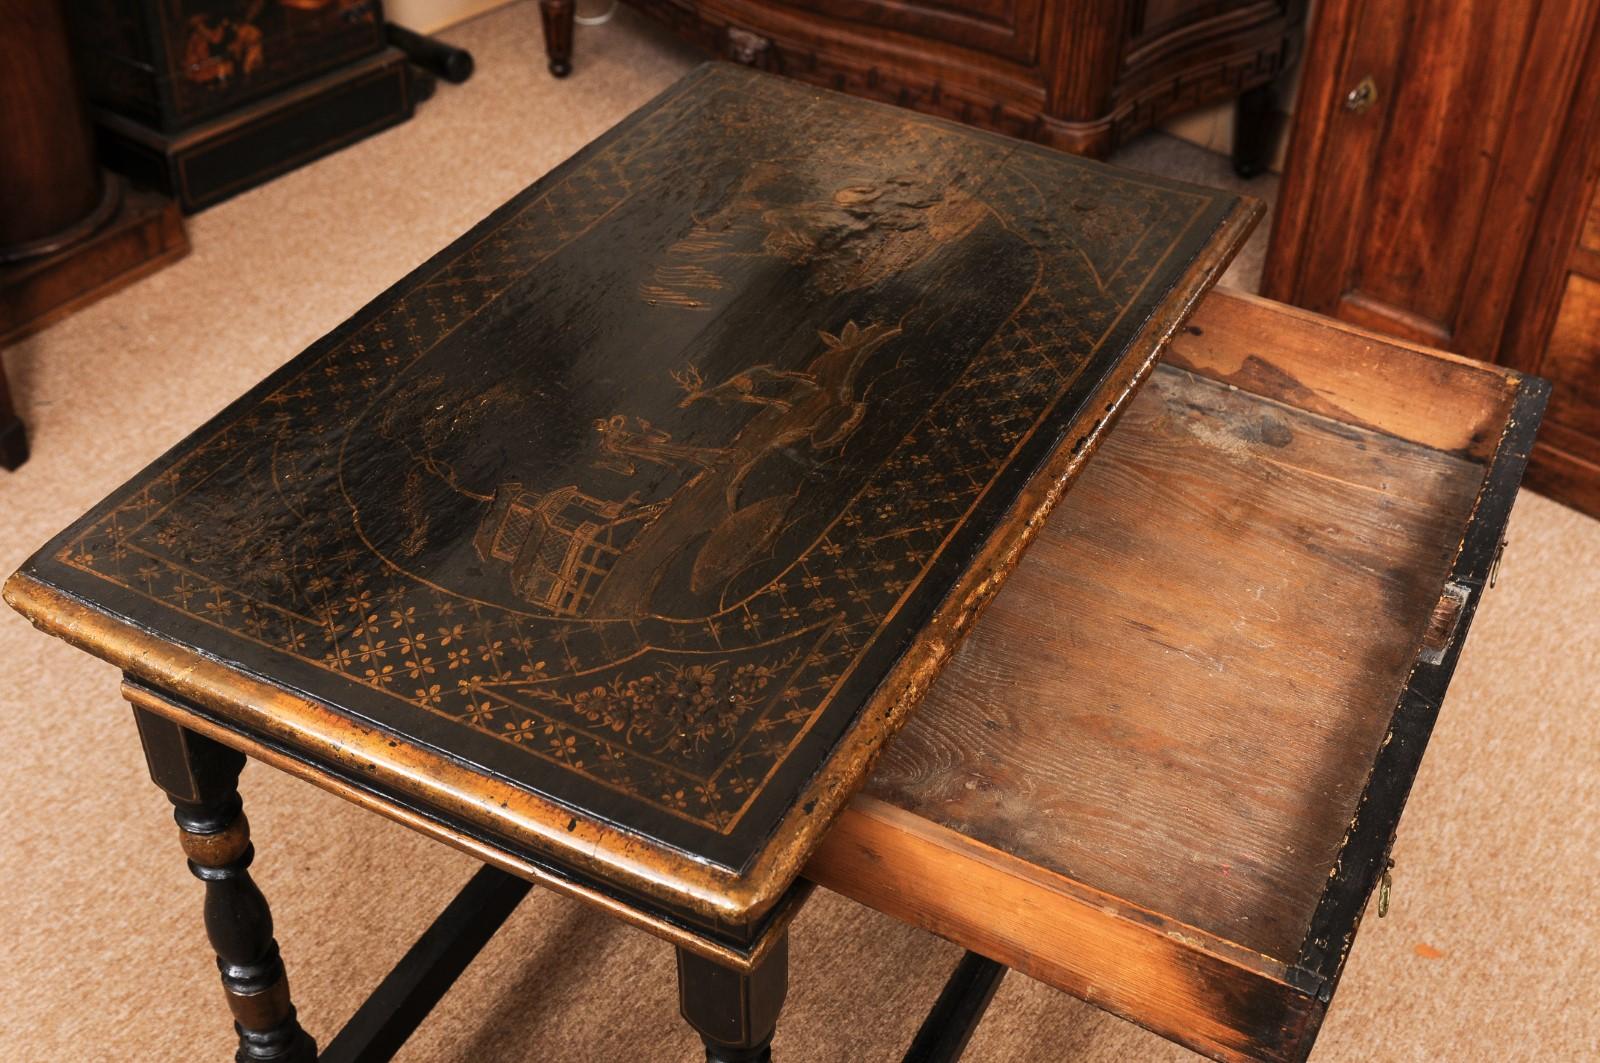 18th Century and Earlier 18th Century English Chinoiserie Decorated Side Table with Drawer, Turned Legs & For Sale